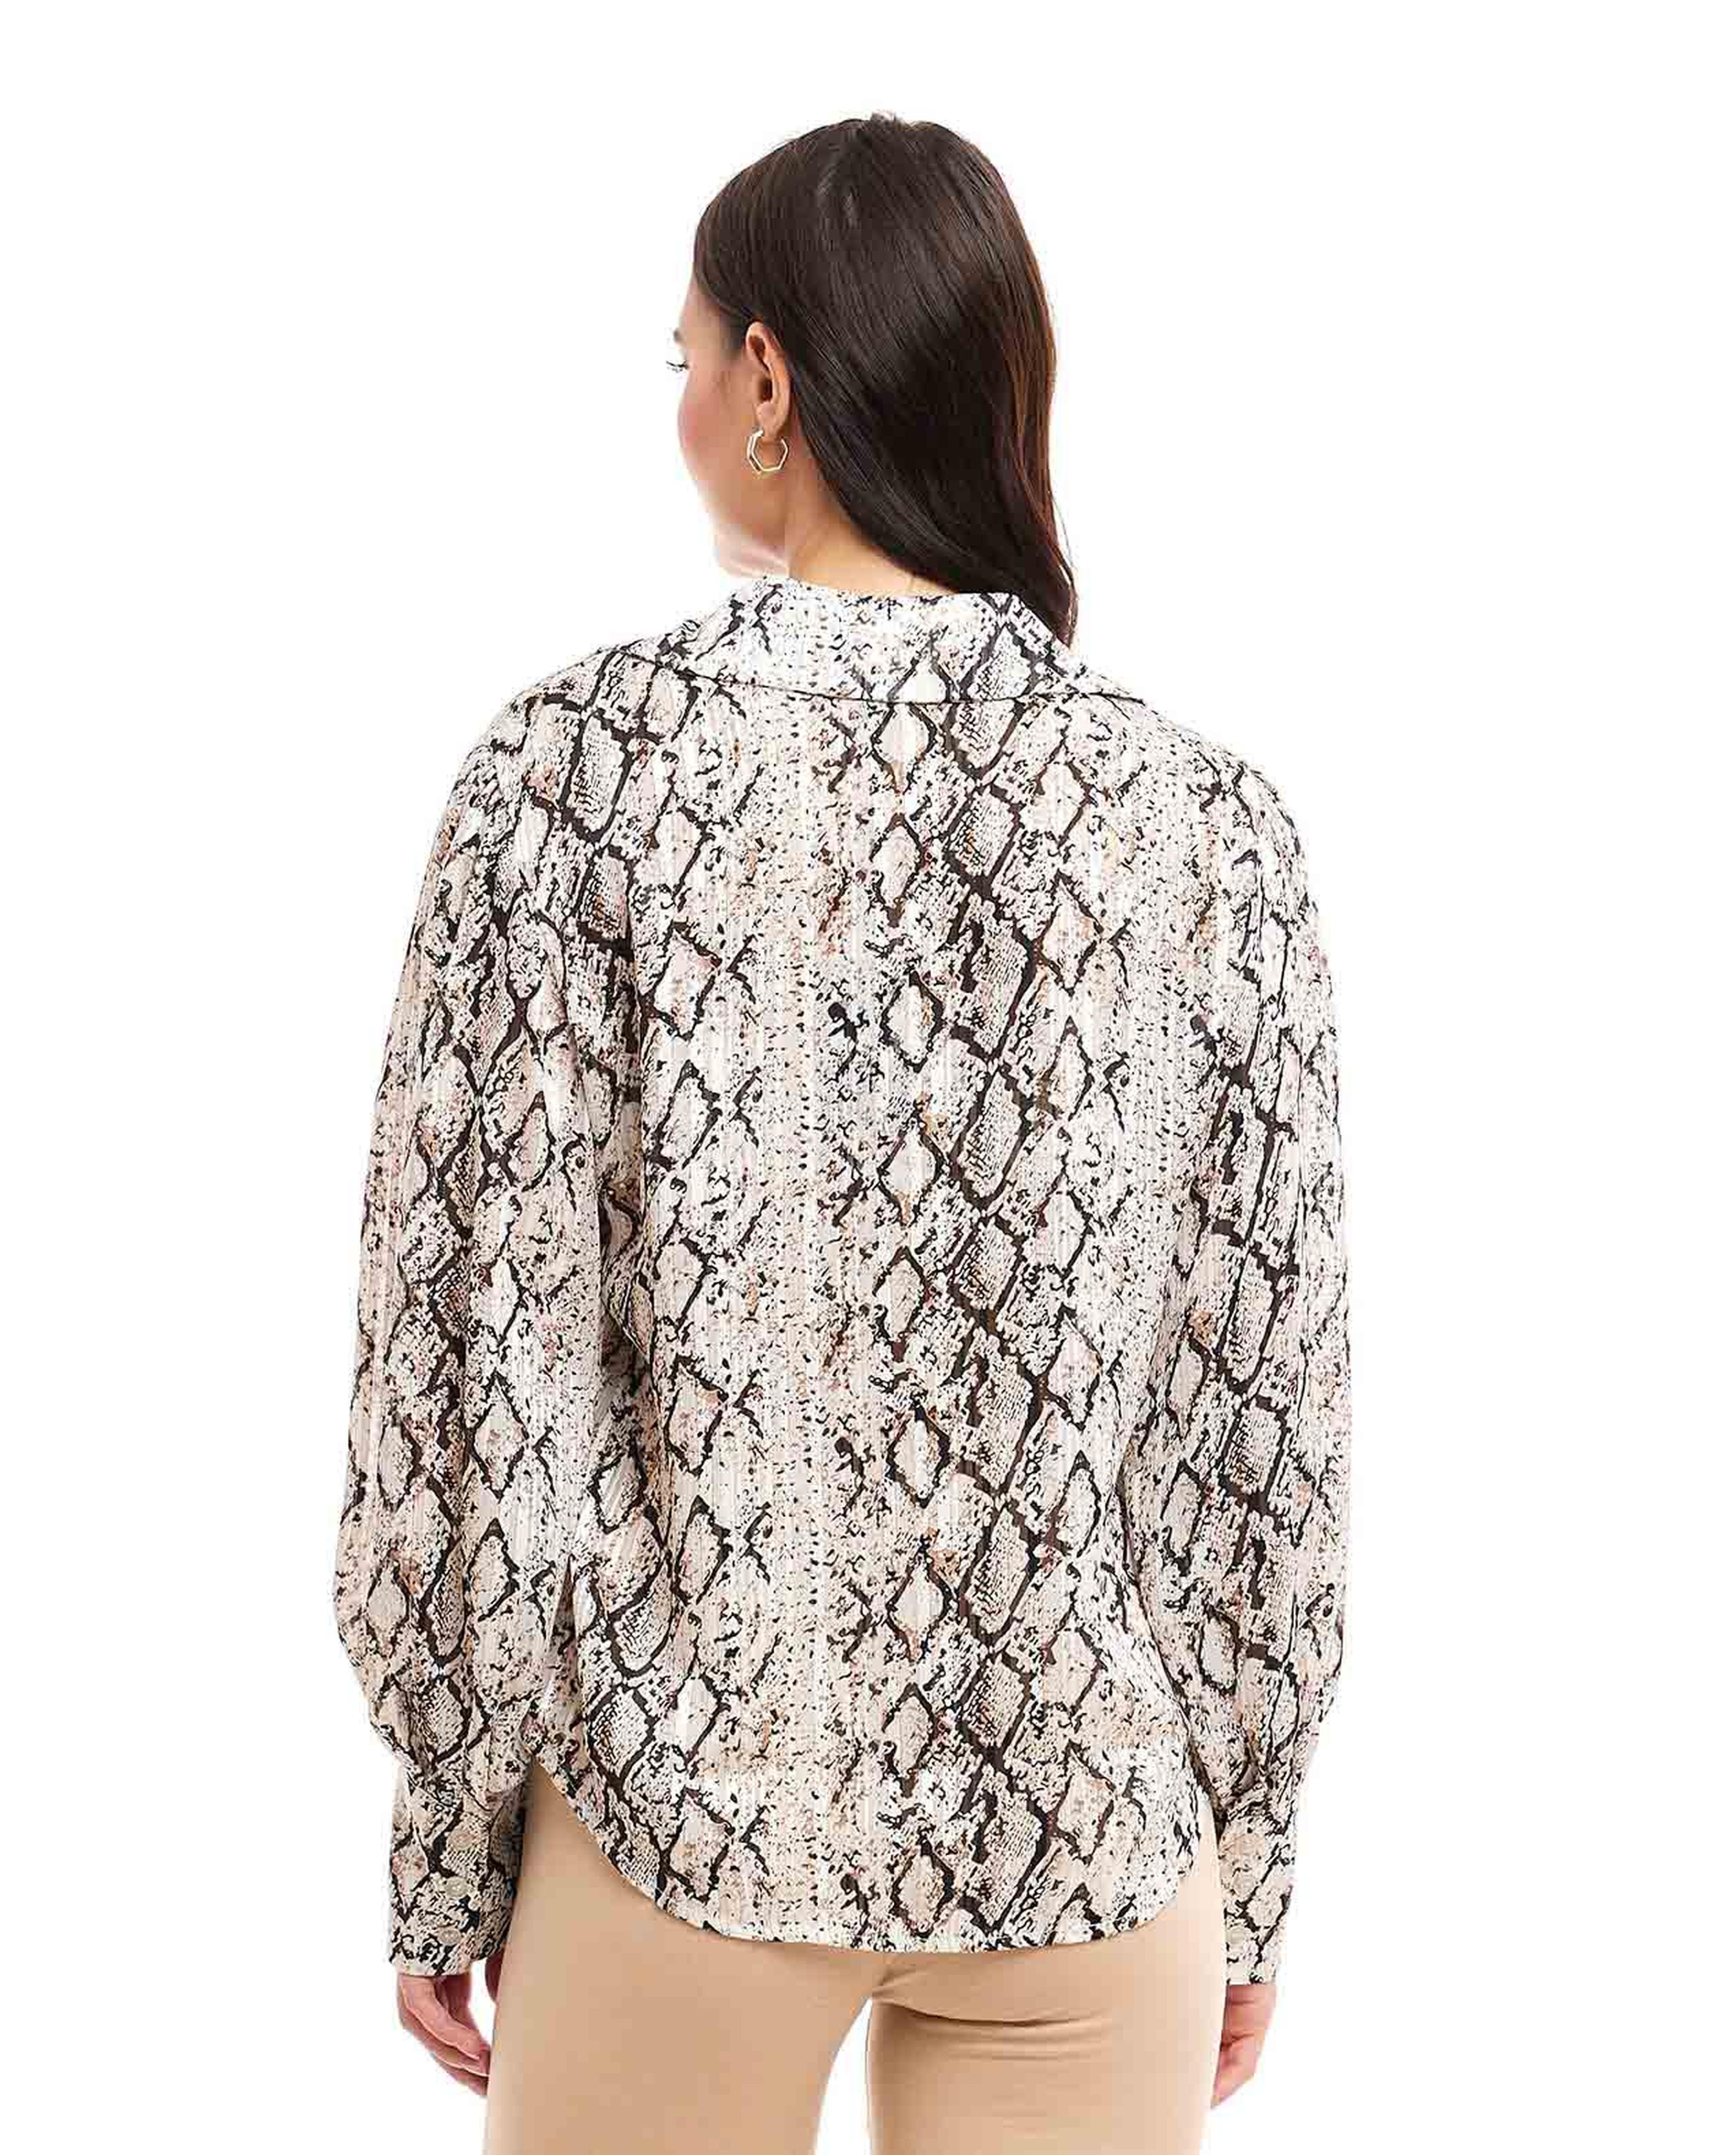 Snakeskin Shirt with Spread Collar and Bishop Sleeves